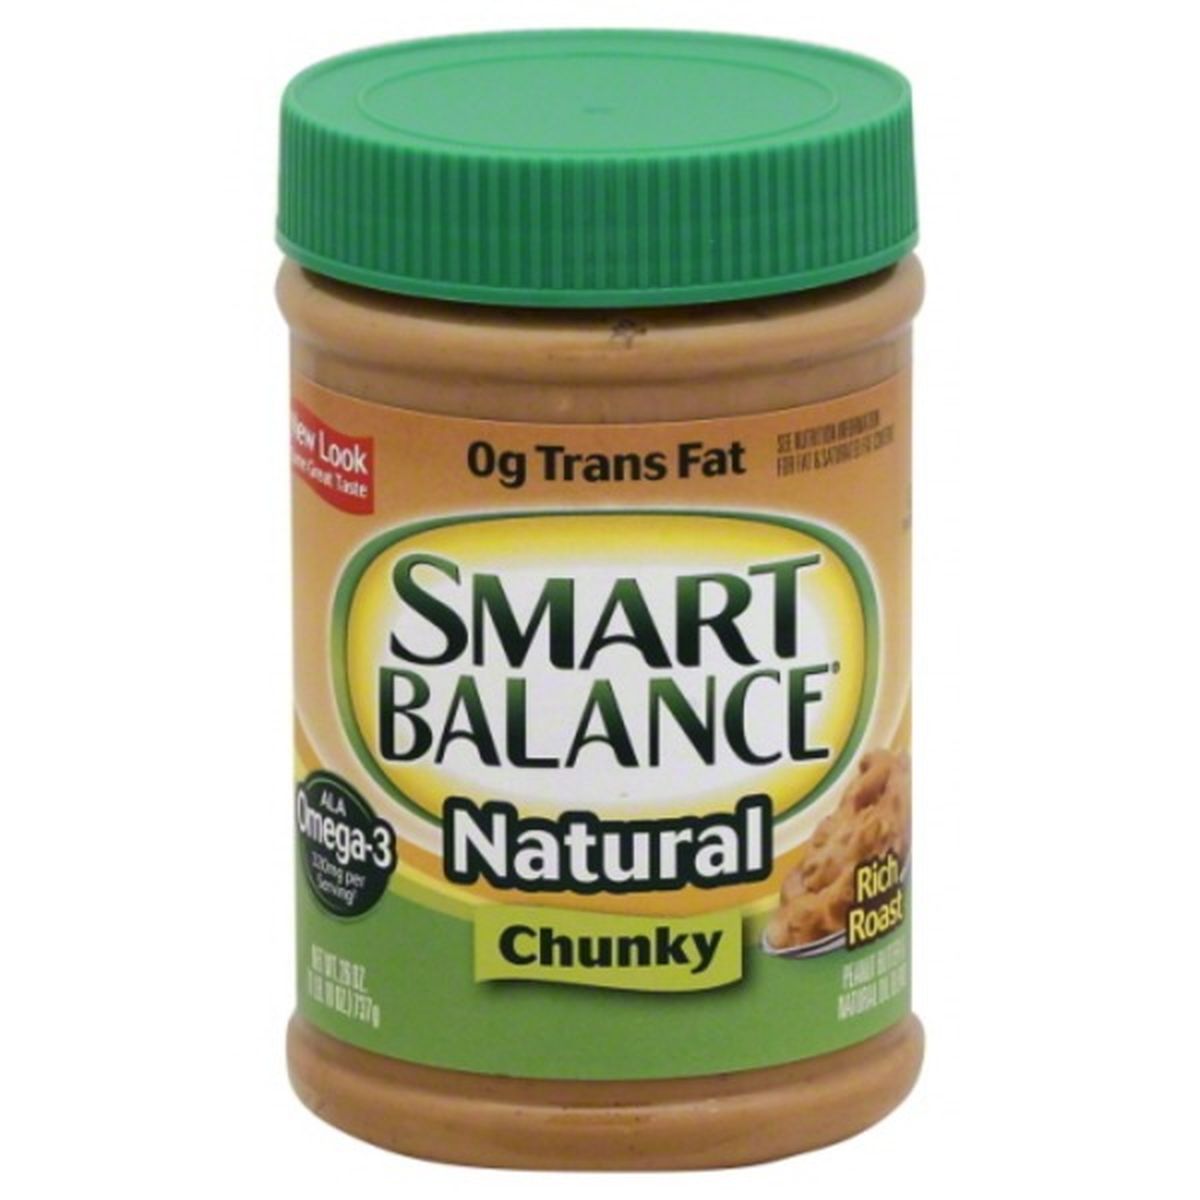 Calories in Smart Balance Rich Roast Peanut Butter, Natural, Chunky